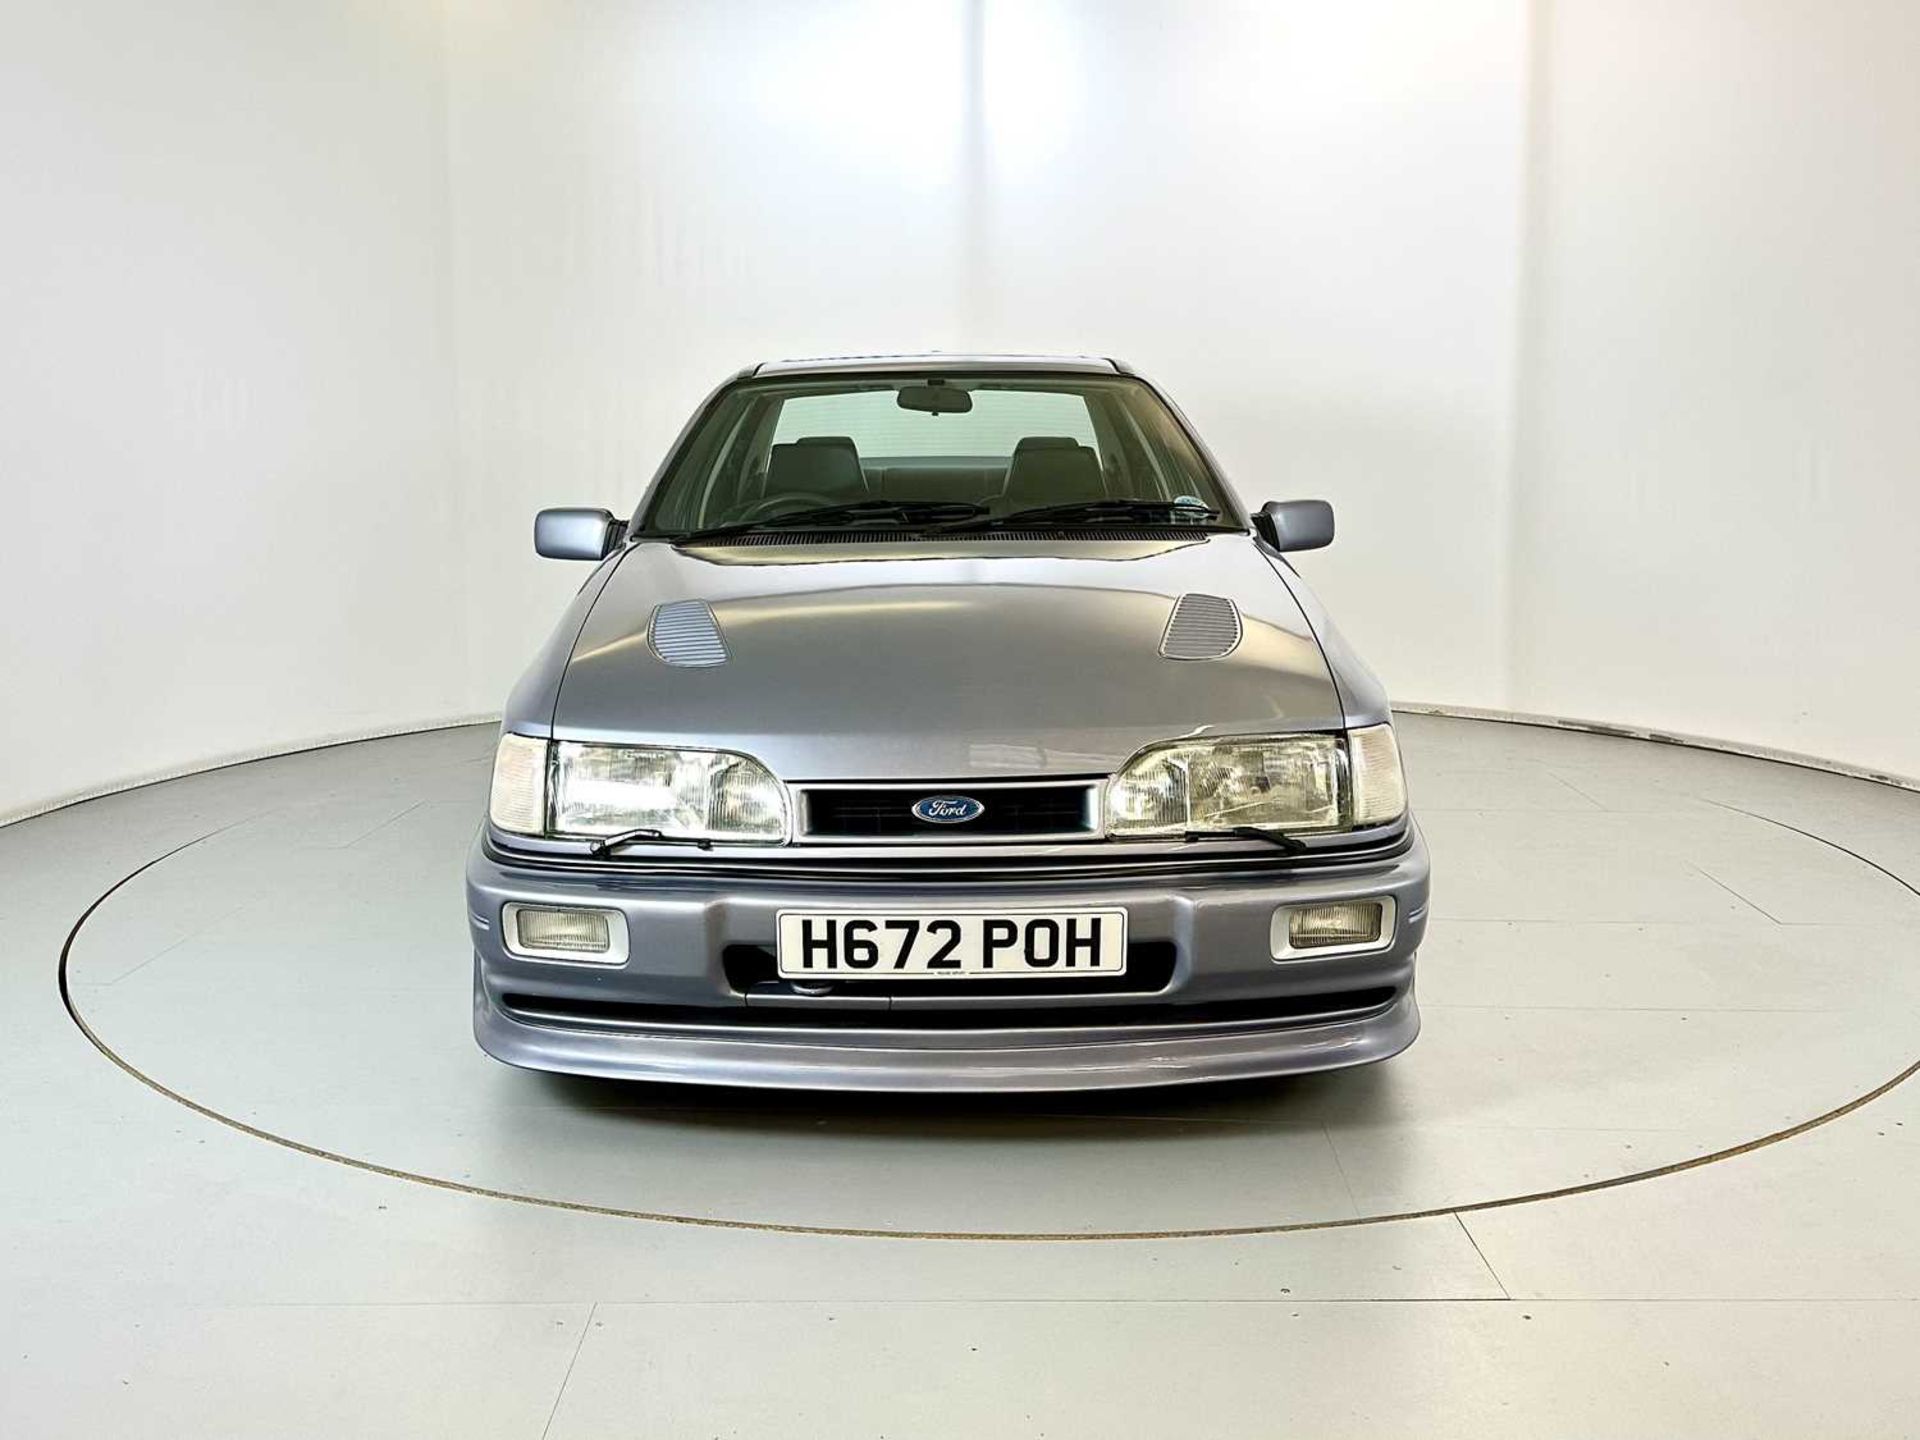 1991 Ford Sierra RS Cosworth Rouse Sport 304R - Image 2 of 40